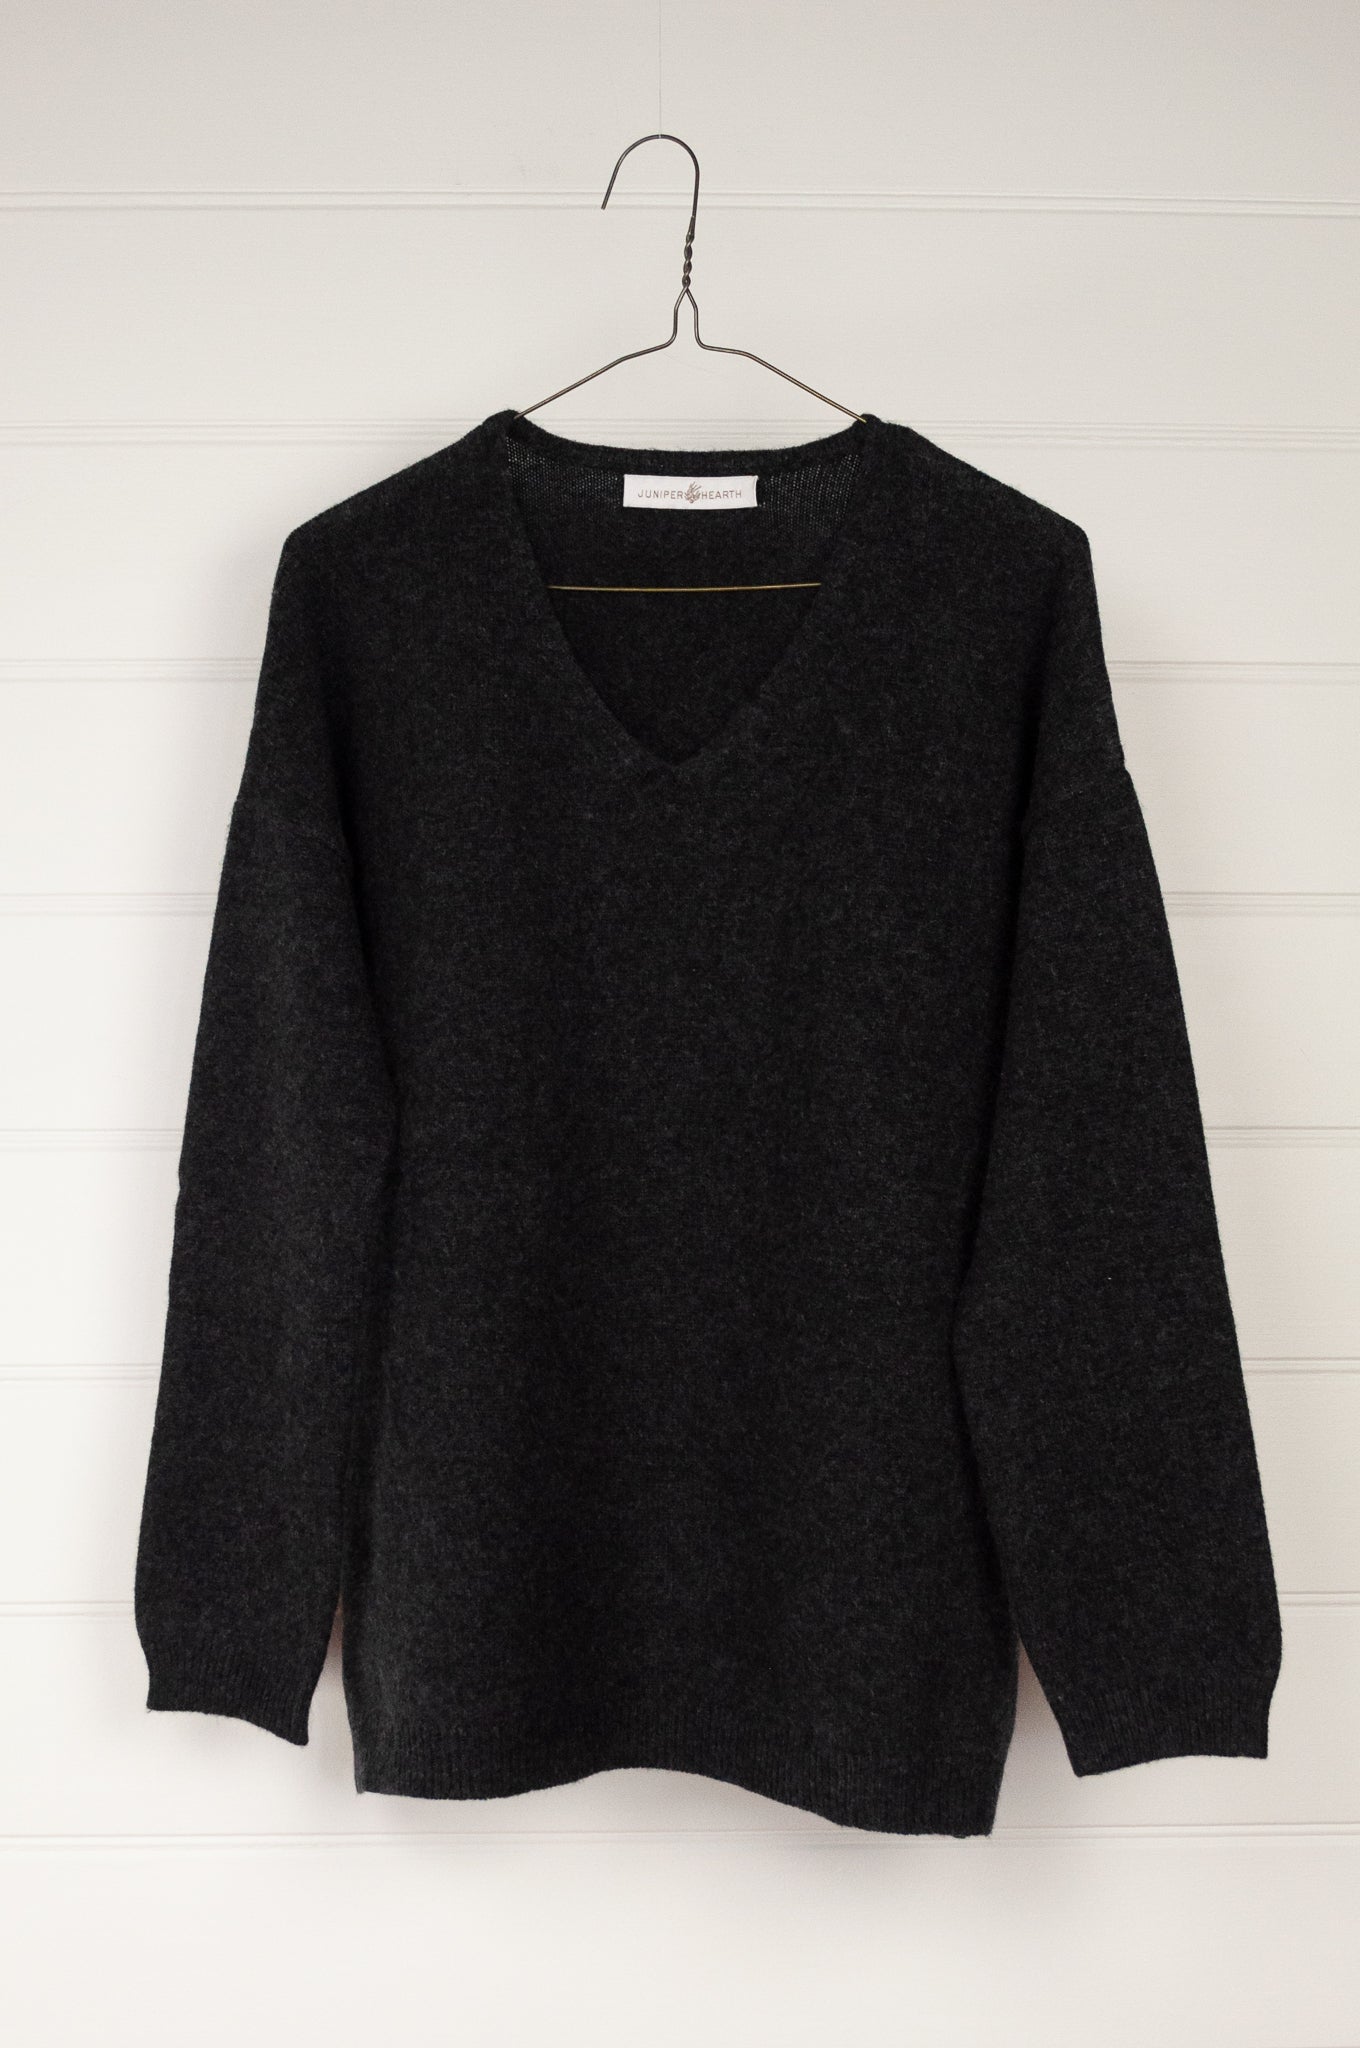 Juniper Hearth classic V neck sweater in pure cashmere, dark charcoal grey, easy fit with side slits.